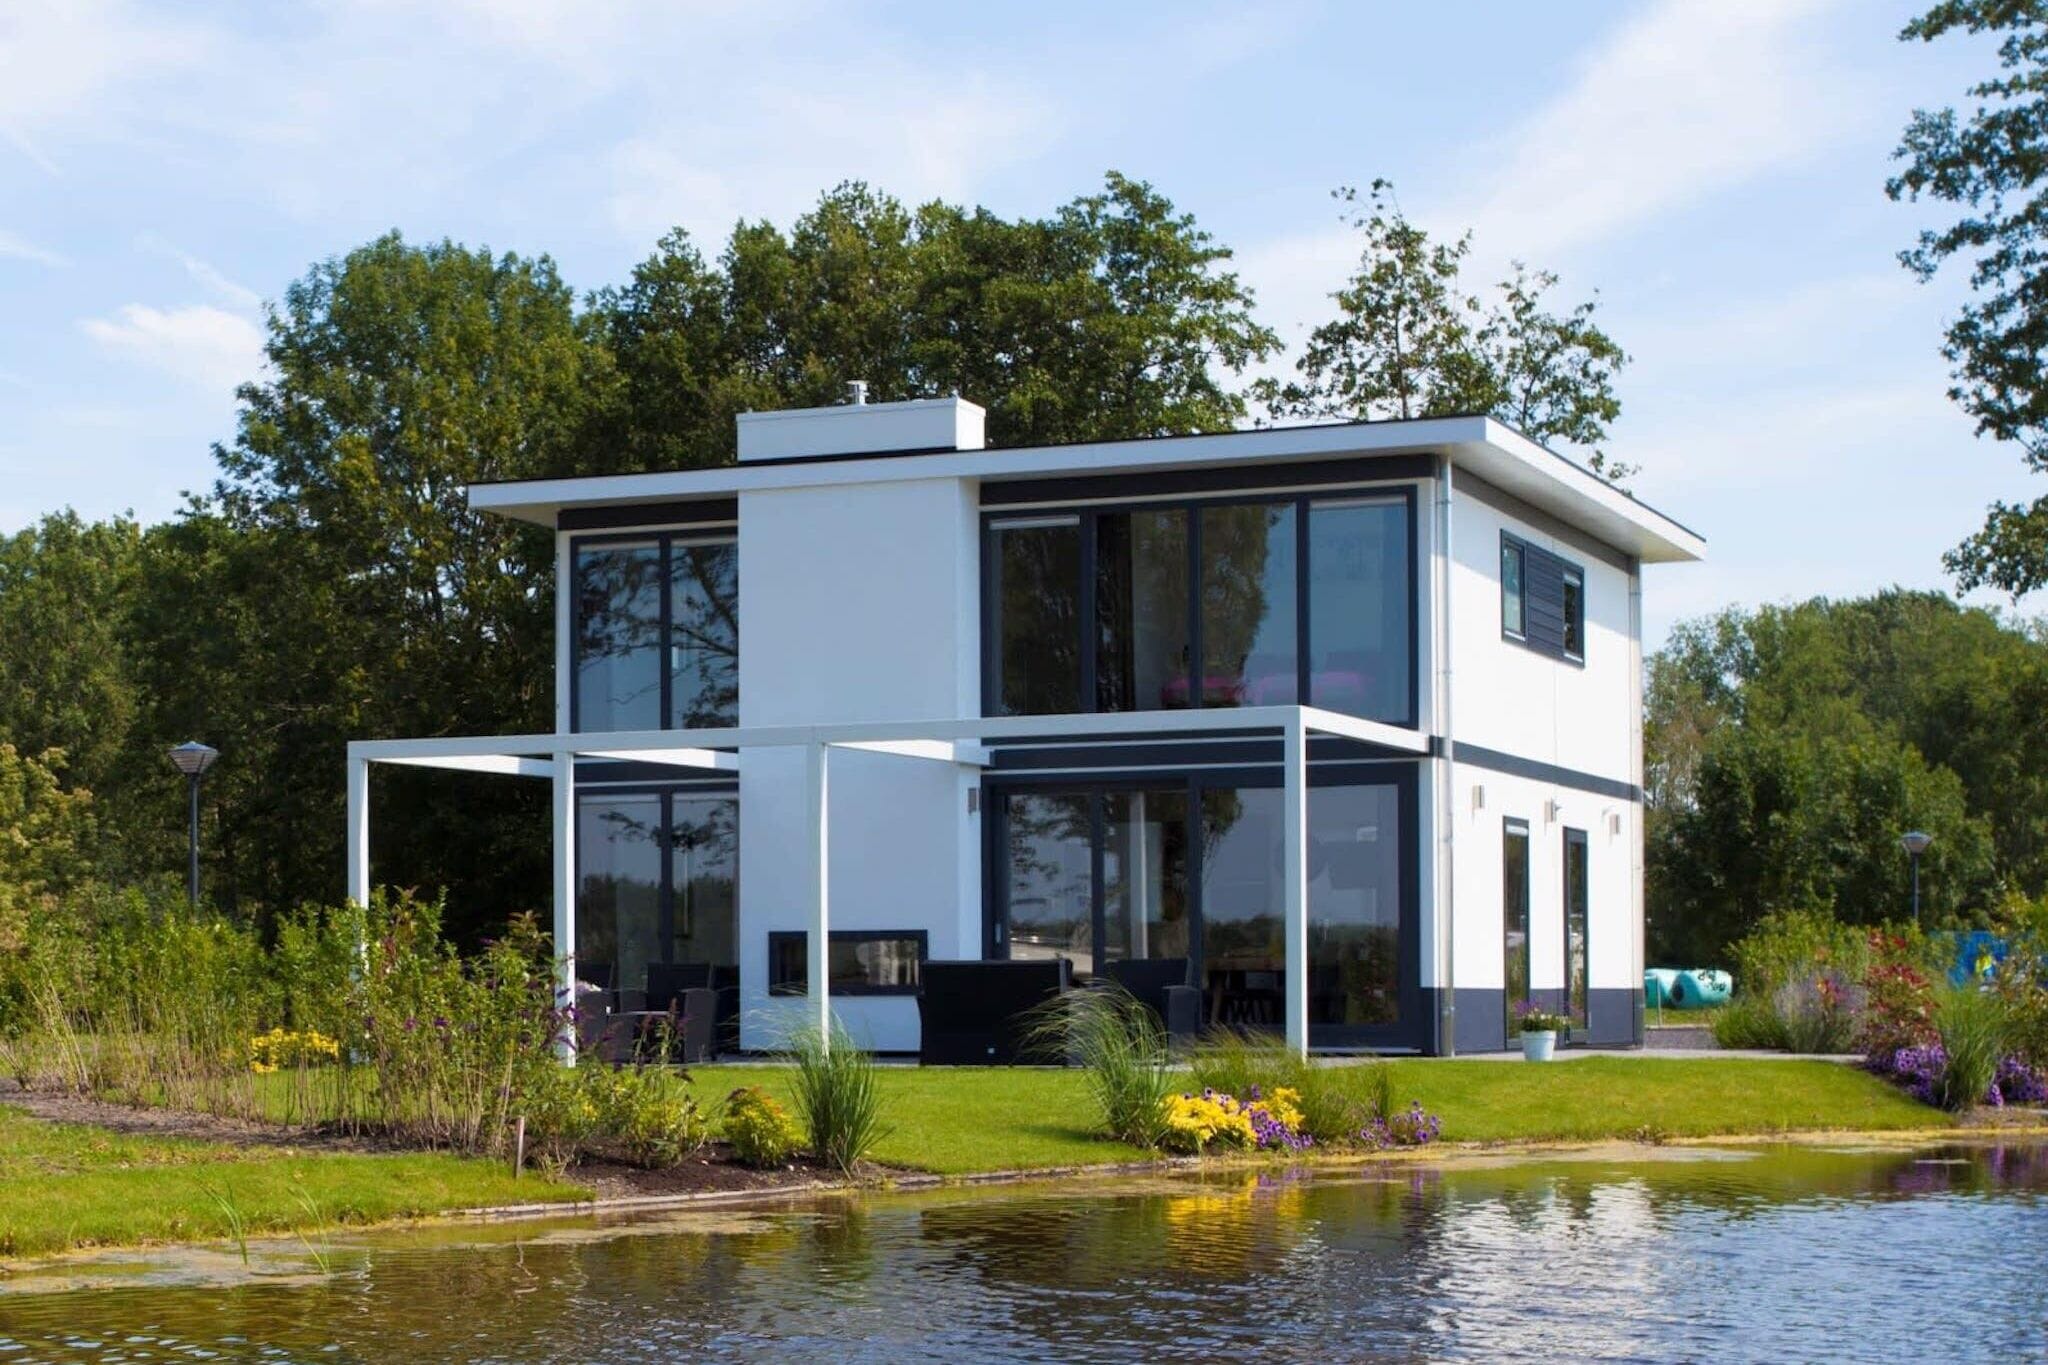 Detached holiday home, near the Veluwemeer